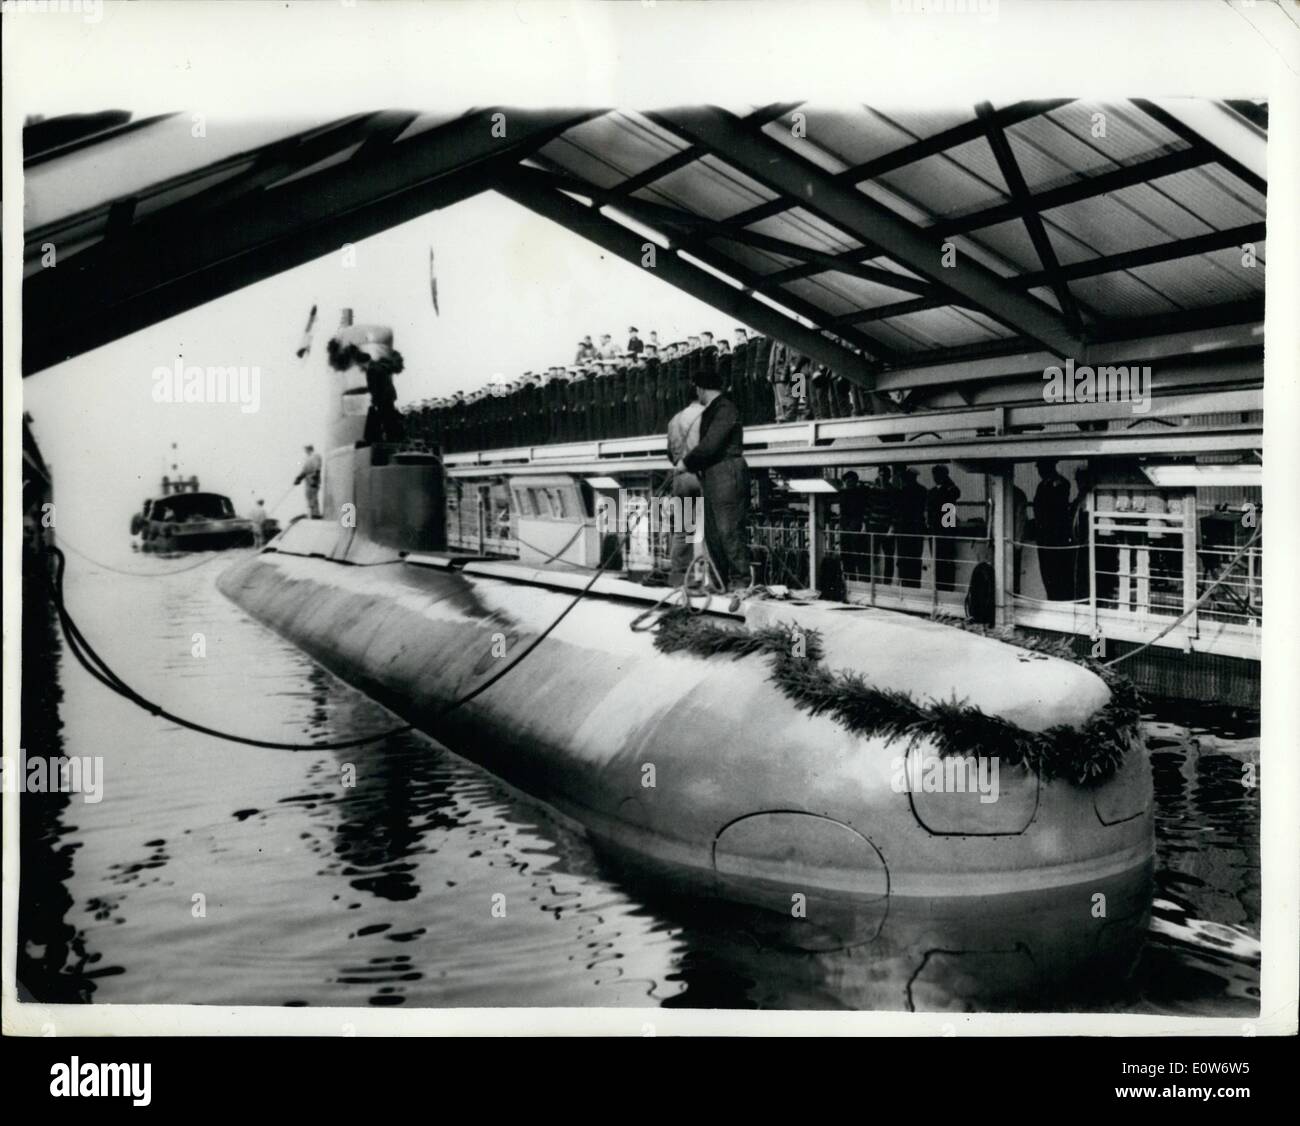 Oct. 10, 1961 - ''U Boat'' No. 1 is launched, first Postwar Submarine for West German Navy; The First U Boat of the German Postwar fleet was launched during the week end at Kiel - famous as the center of wartime underwater craft. U Boat no. 1 is said to be extremely fast but the actual speed is secret and she is able to stay under the water indefinitely. She weighs 350 tons is more than 120 ft. long and has eight torpedo tubes. This craft is the first of 12 on order and its launching is said to be the re-birth of West Germany as a Naval Power Stock Photo